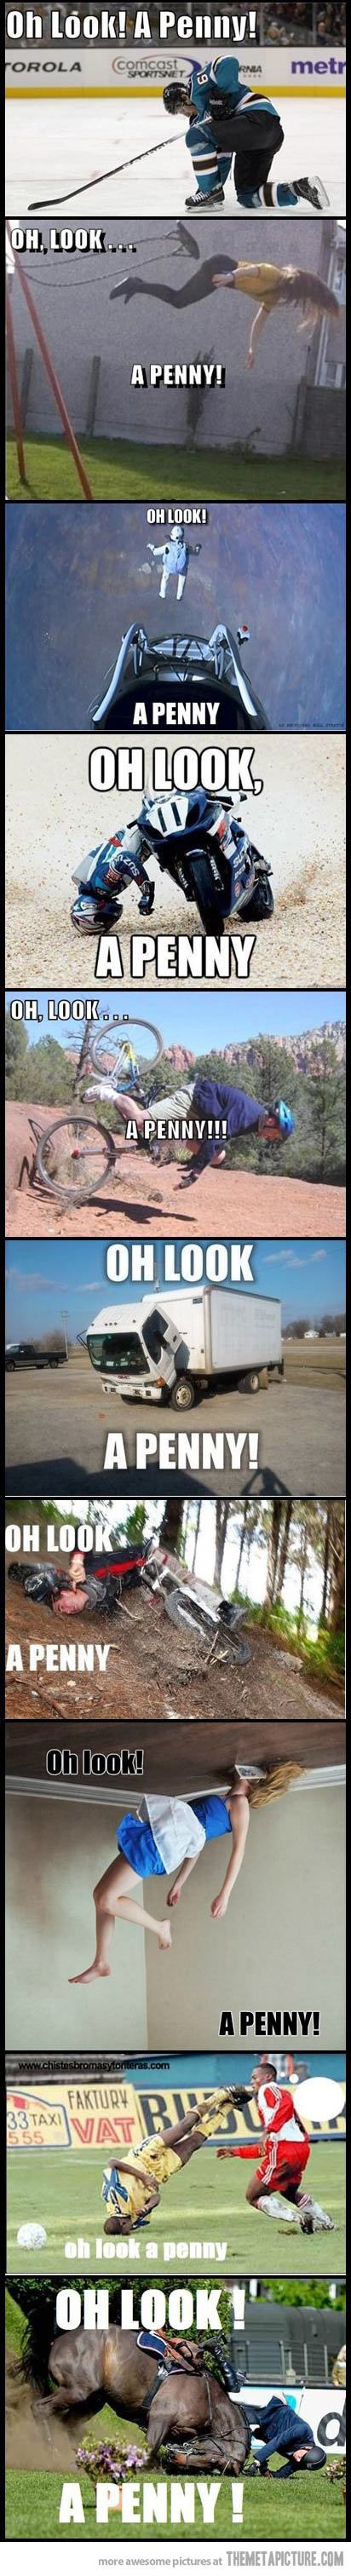 Oh look, a penny!